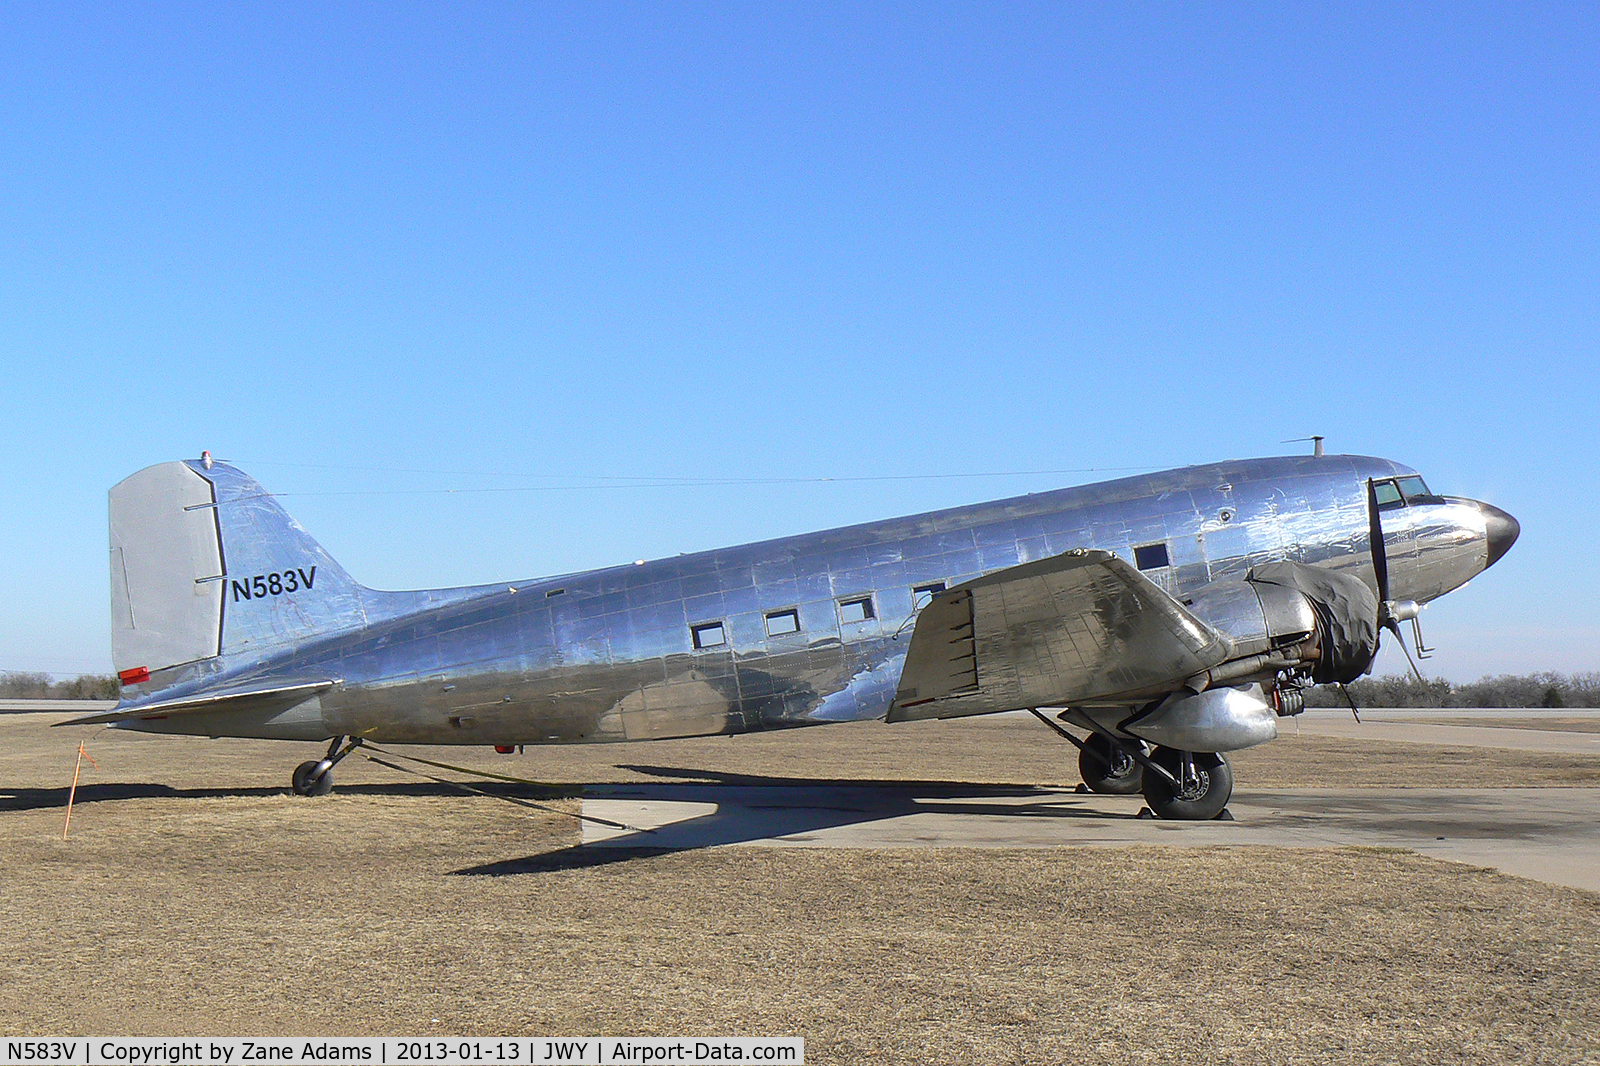 N583V, 1942 Douglas DC3C-S1C3G (C-47A-5-DK) C/N 12369, After 30 years on the ground this DC-3 is once again earning her keep with Airborne Imaging...and looking great!